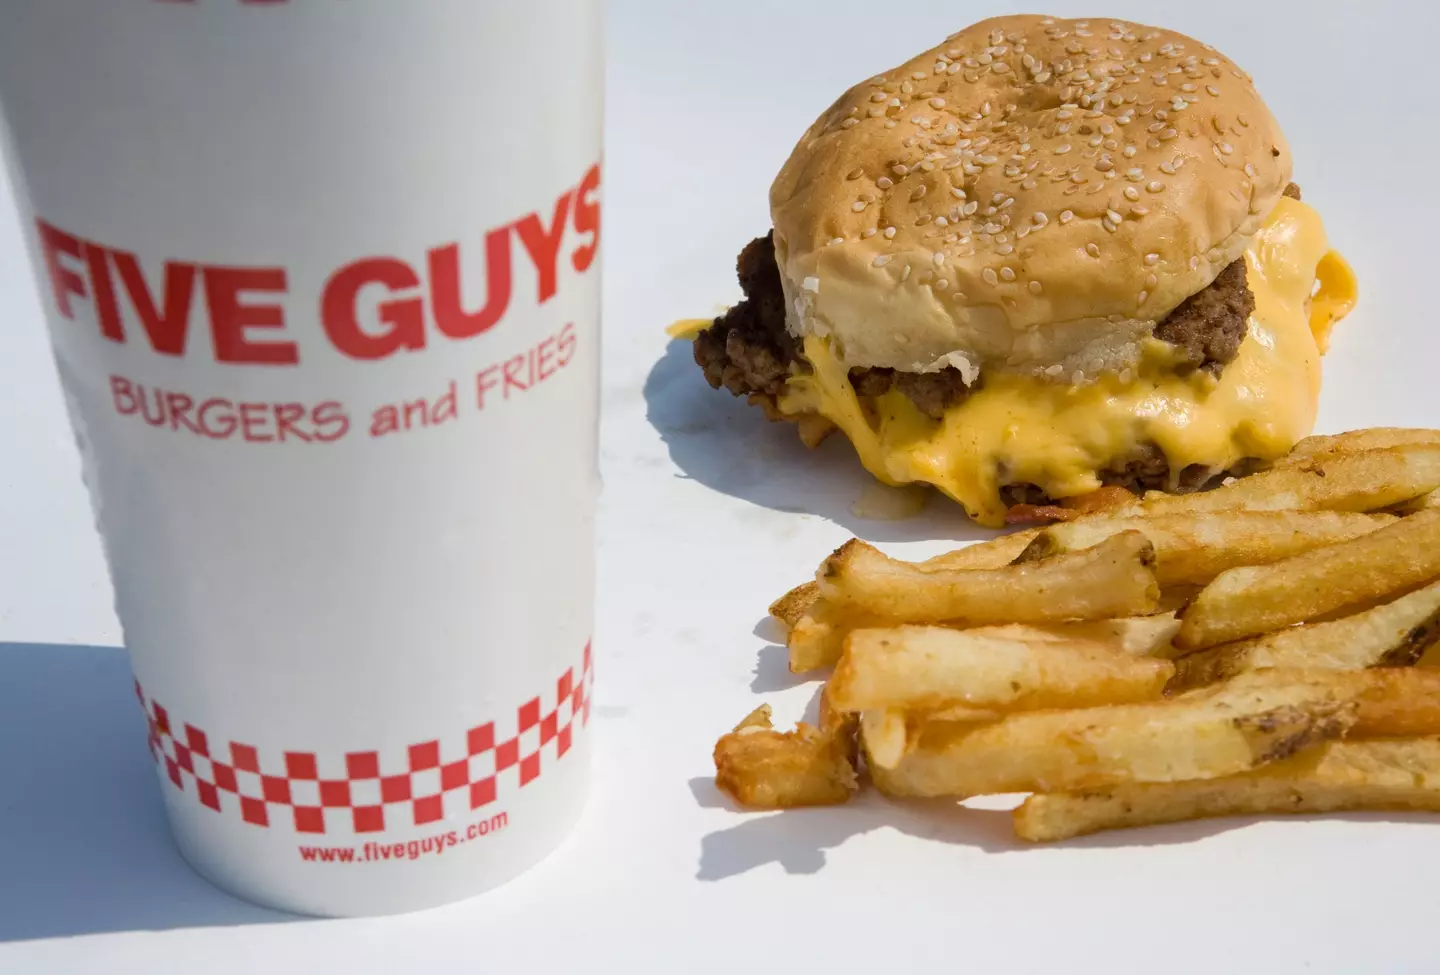 Five Guys allows you to make your burger the way you want.